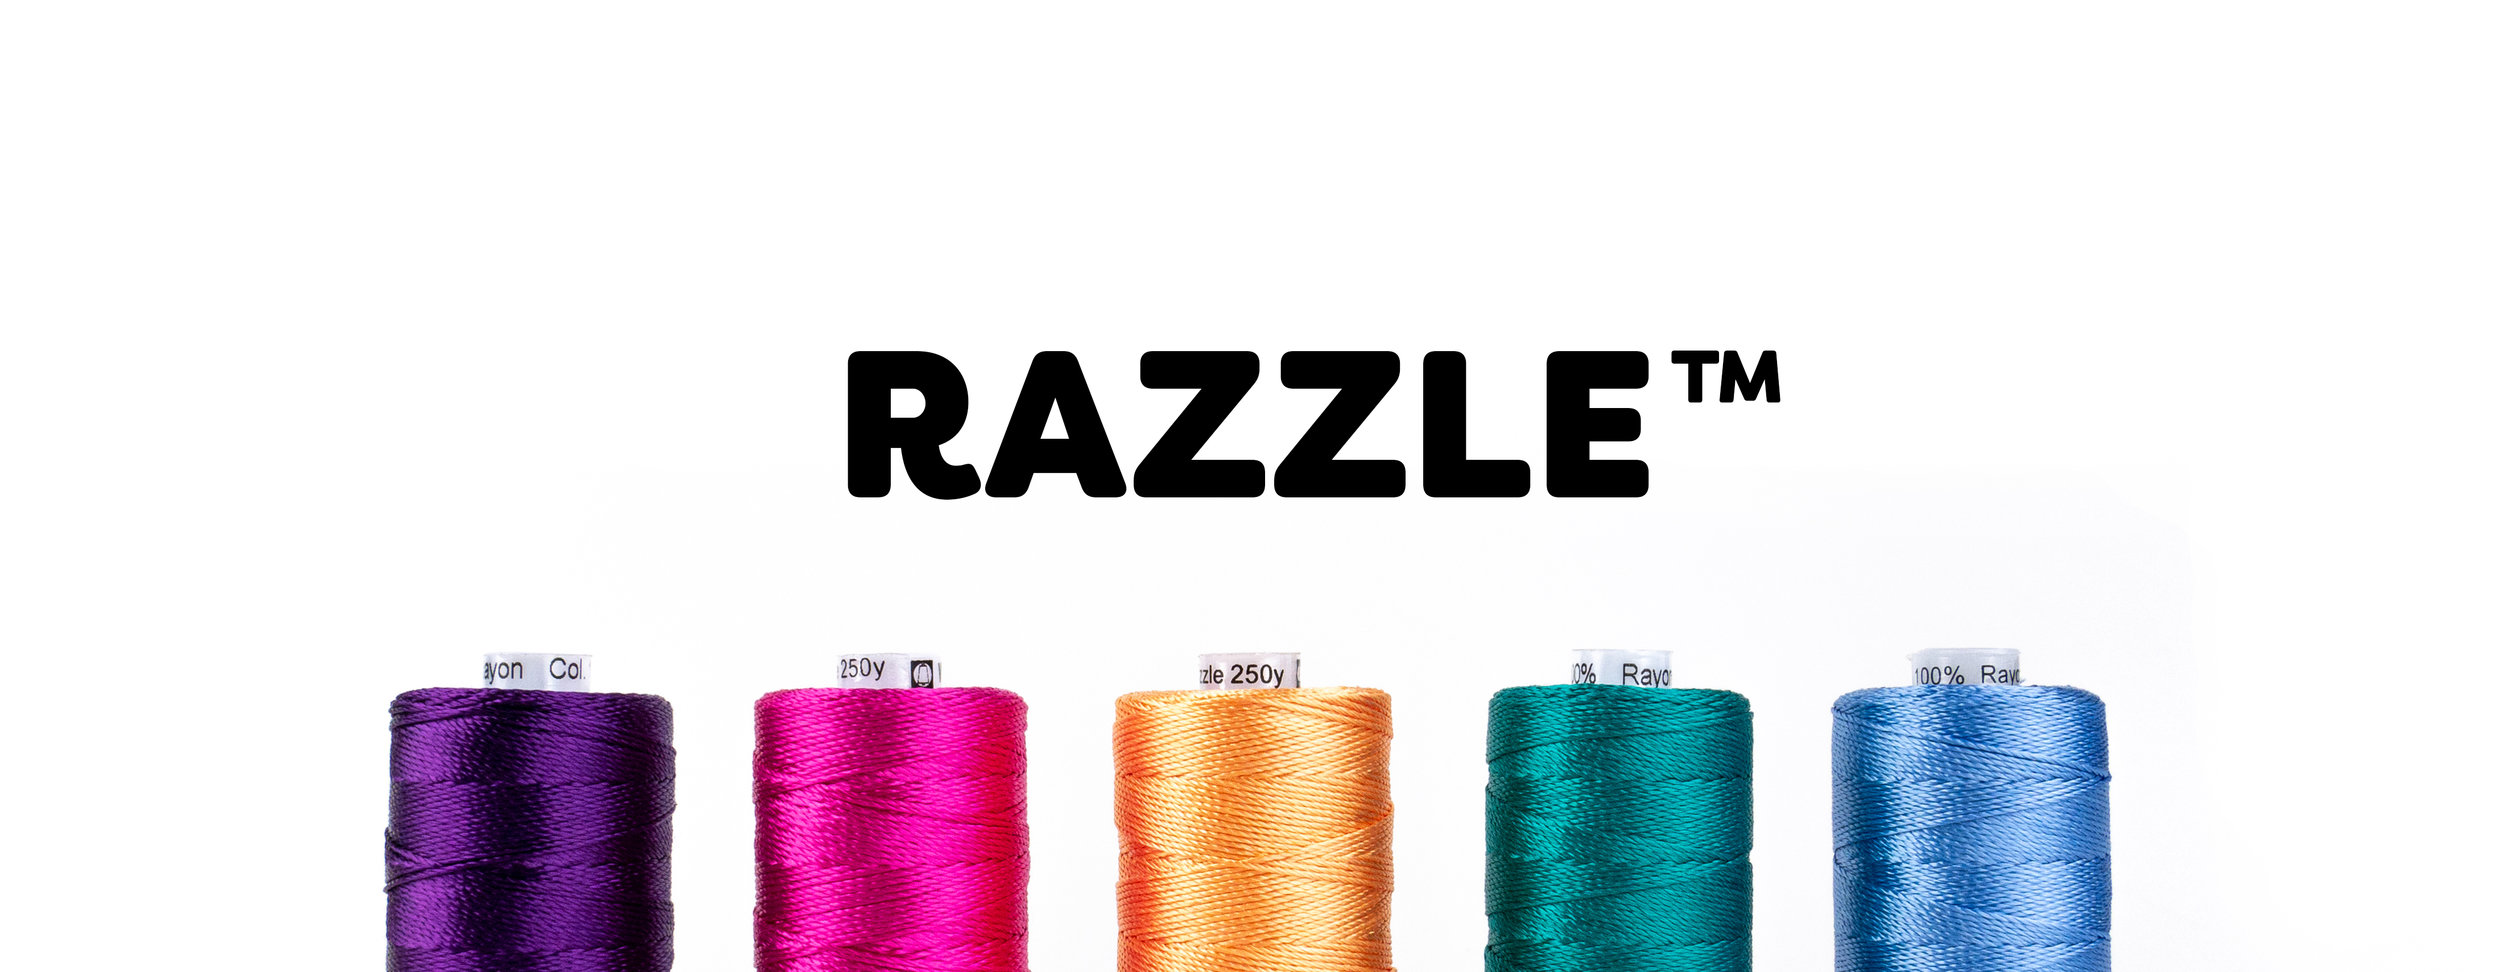 Orange This sturdy 6-ply 100% rayon thread is comparable in weight to a #8 perle cotton. WonderFil Specialty Threads Razzle 